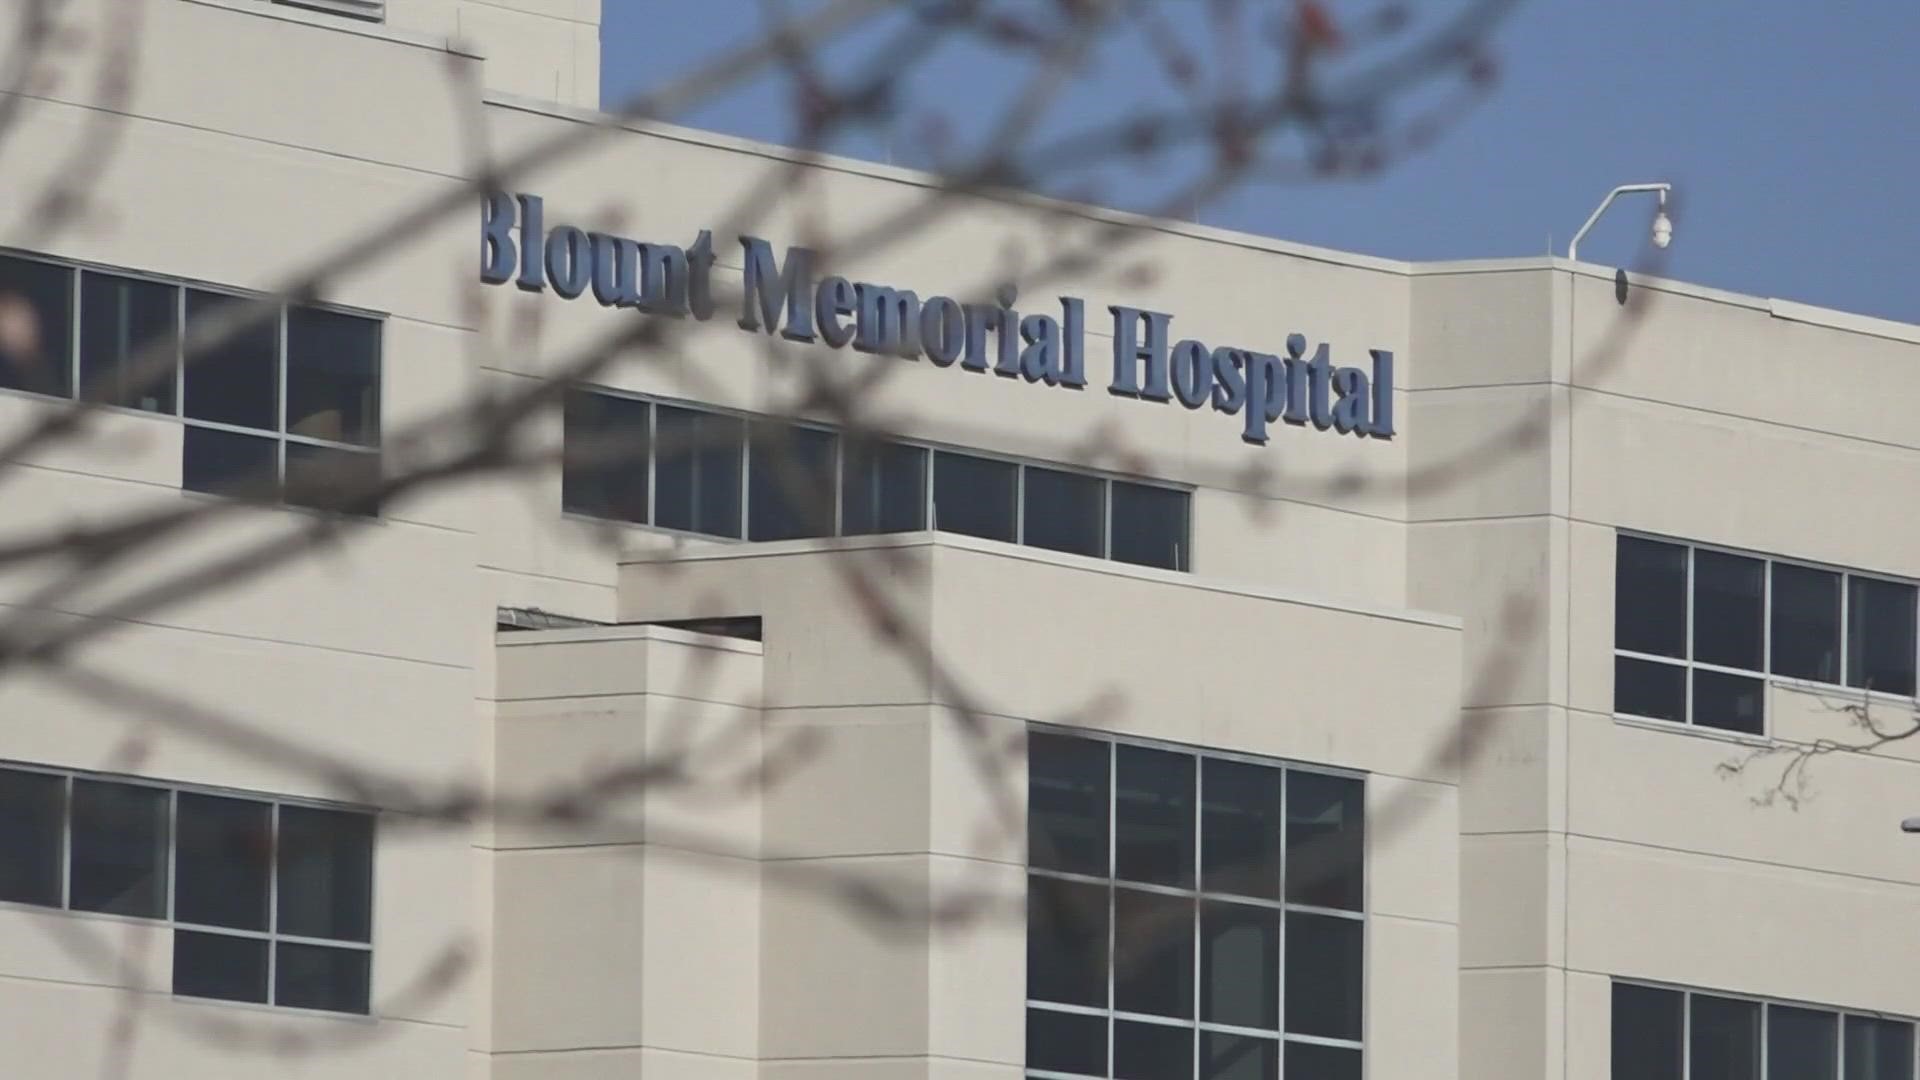 "The reputation and survival of Blount Memorial Hospital depends upon the decisions we make in the next few weeks," Mayor Ed Mitchell said.